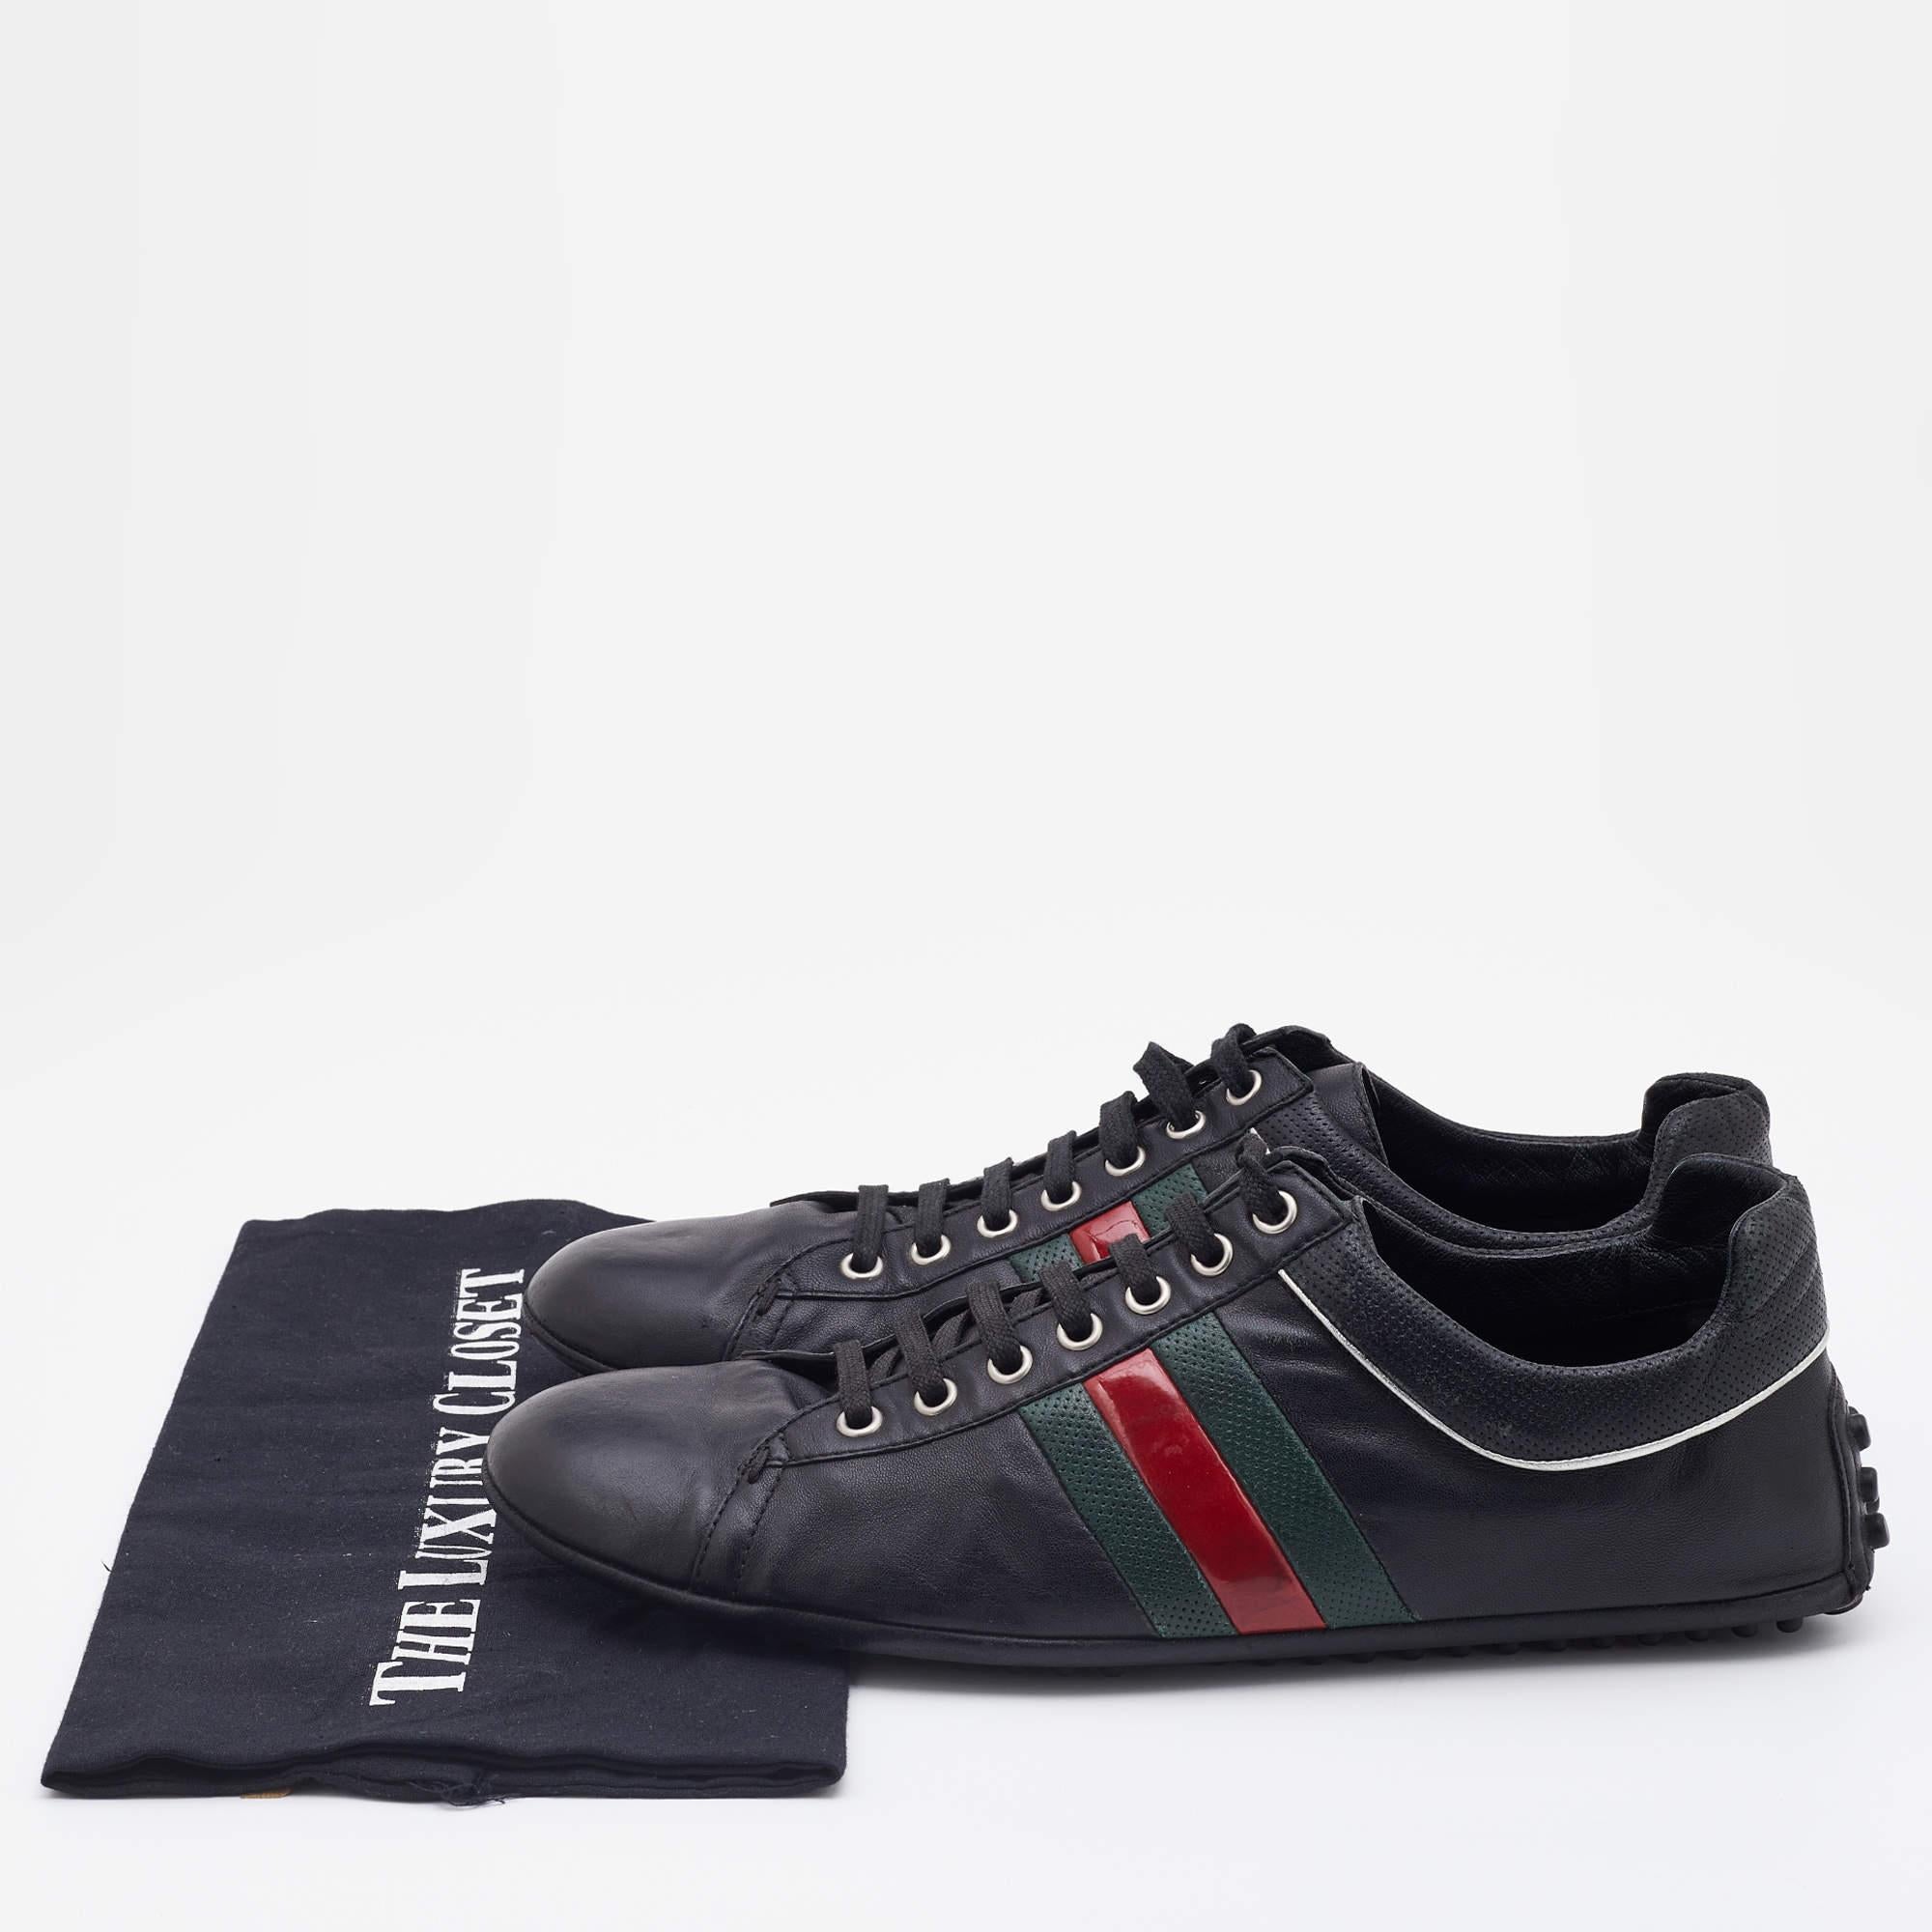 Gucci Black Leather Web Detail Low Top Sneakers Size 42.5 5